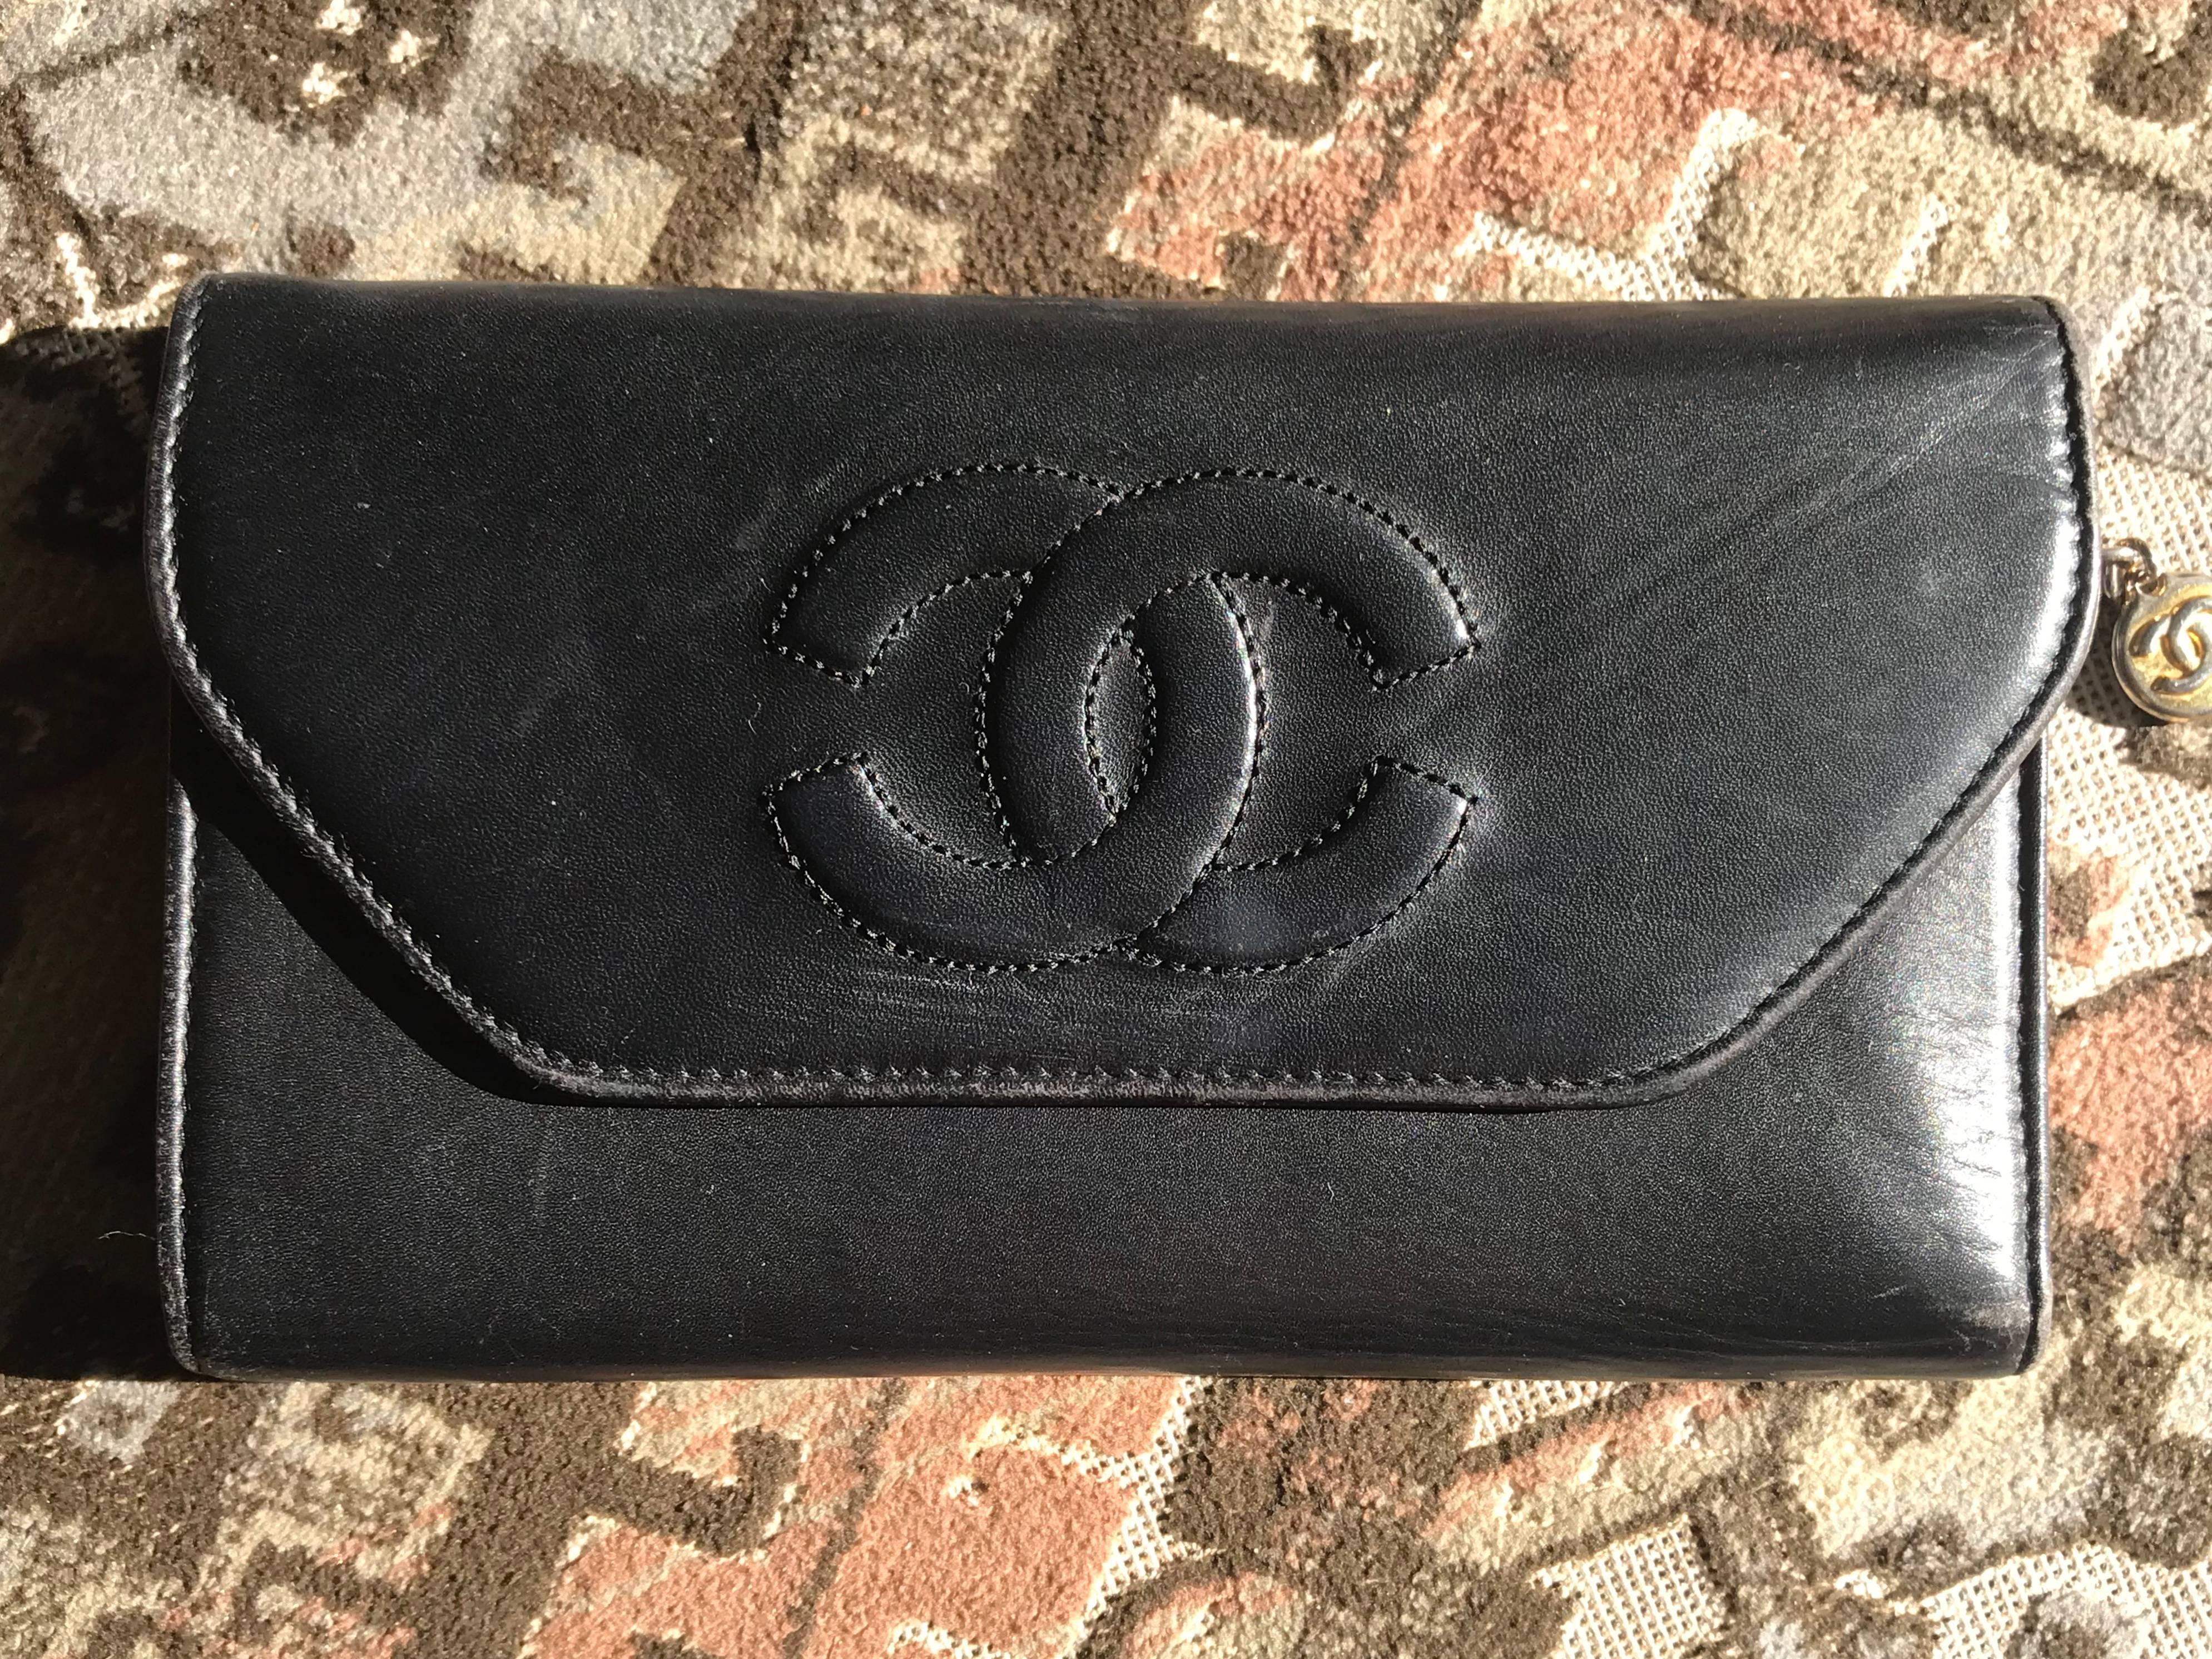 1990s. Vintage CHANEL black leather wallet with large CC stitch mark. 

This is a CHANEL vintage wallet in black calfskin from 90’s. 
Classic wallet but rare design as vintage Chanel wallets back in the 90’s;
Featuring a chain and CC mark charm to